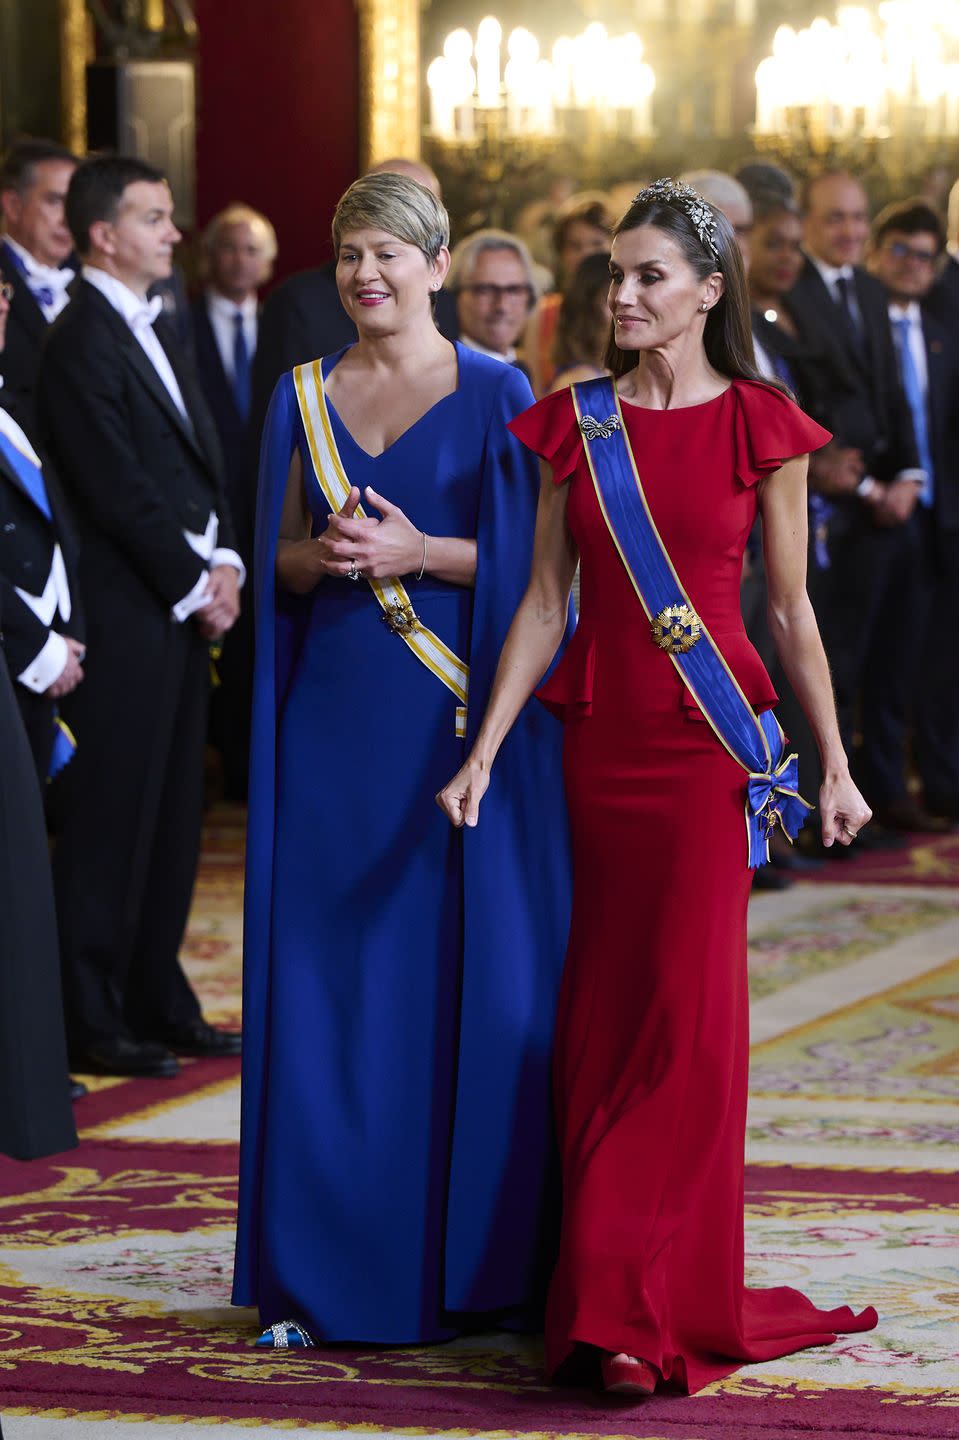 madrid, spain may 03 queen letizia of spain r and wife of the president of colombia veronica alcocer l attend a gala dinner for the president of colombia gustavo francisco petro and his wife at the royal palace on may 03, 2023 in madrid, spain photo by carlos alvarezgetty images